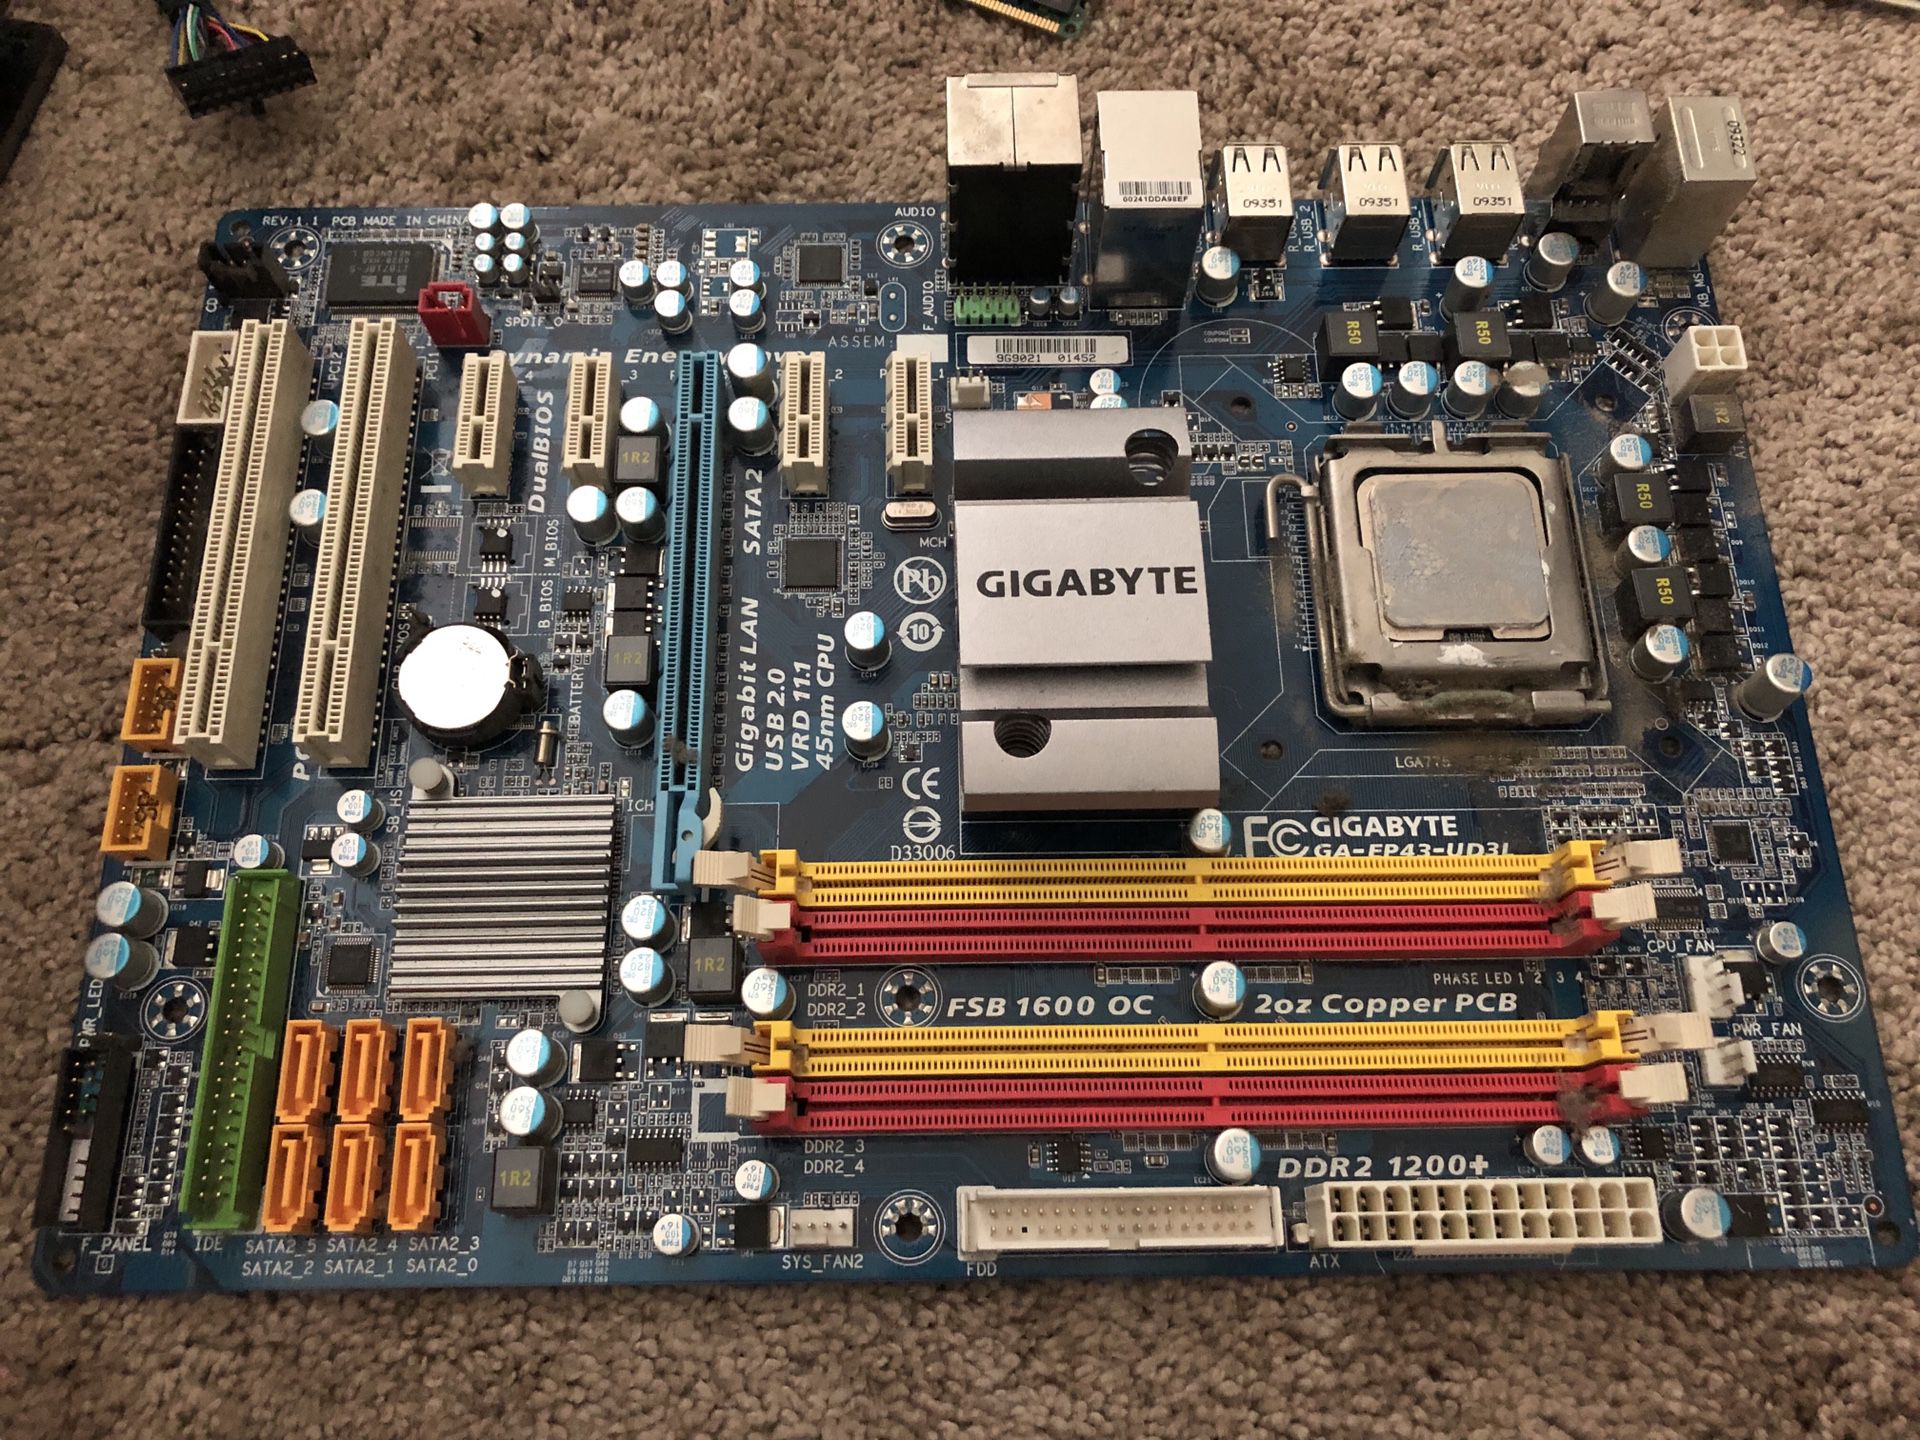 Computer parts, motherboard, memory ram, sound card, video card, power supply, CPU fan, computer fan.